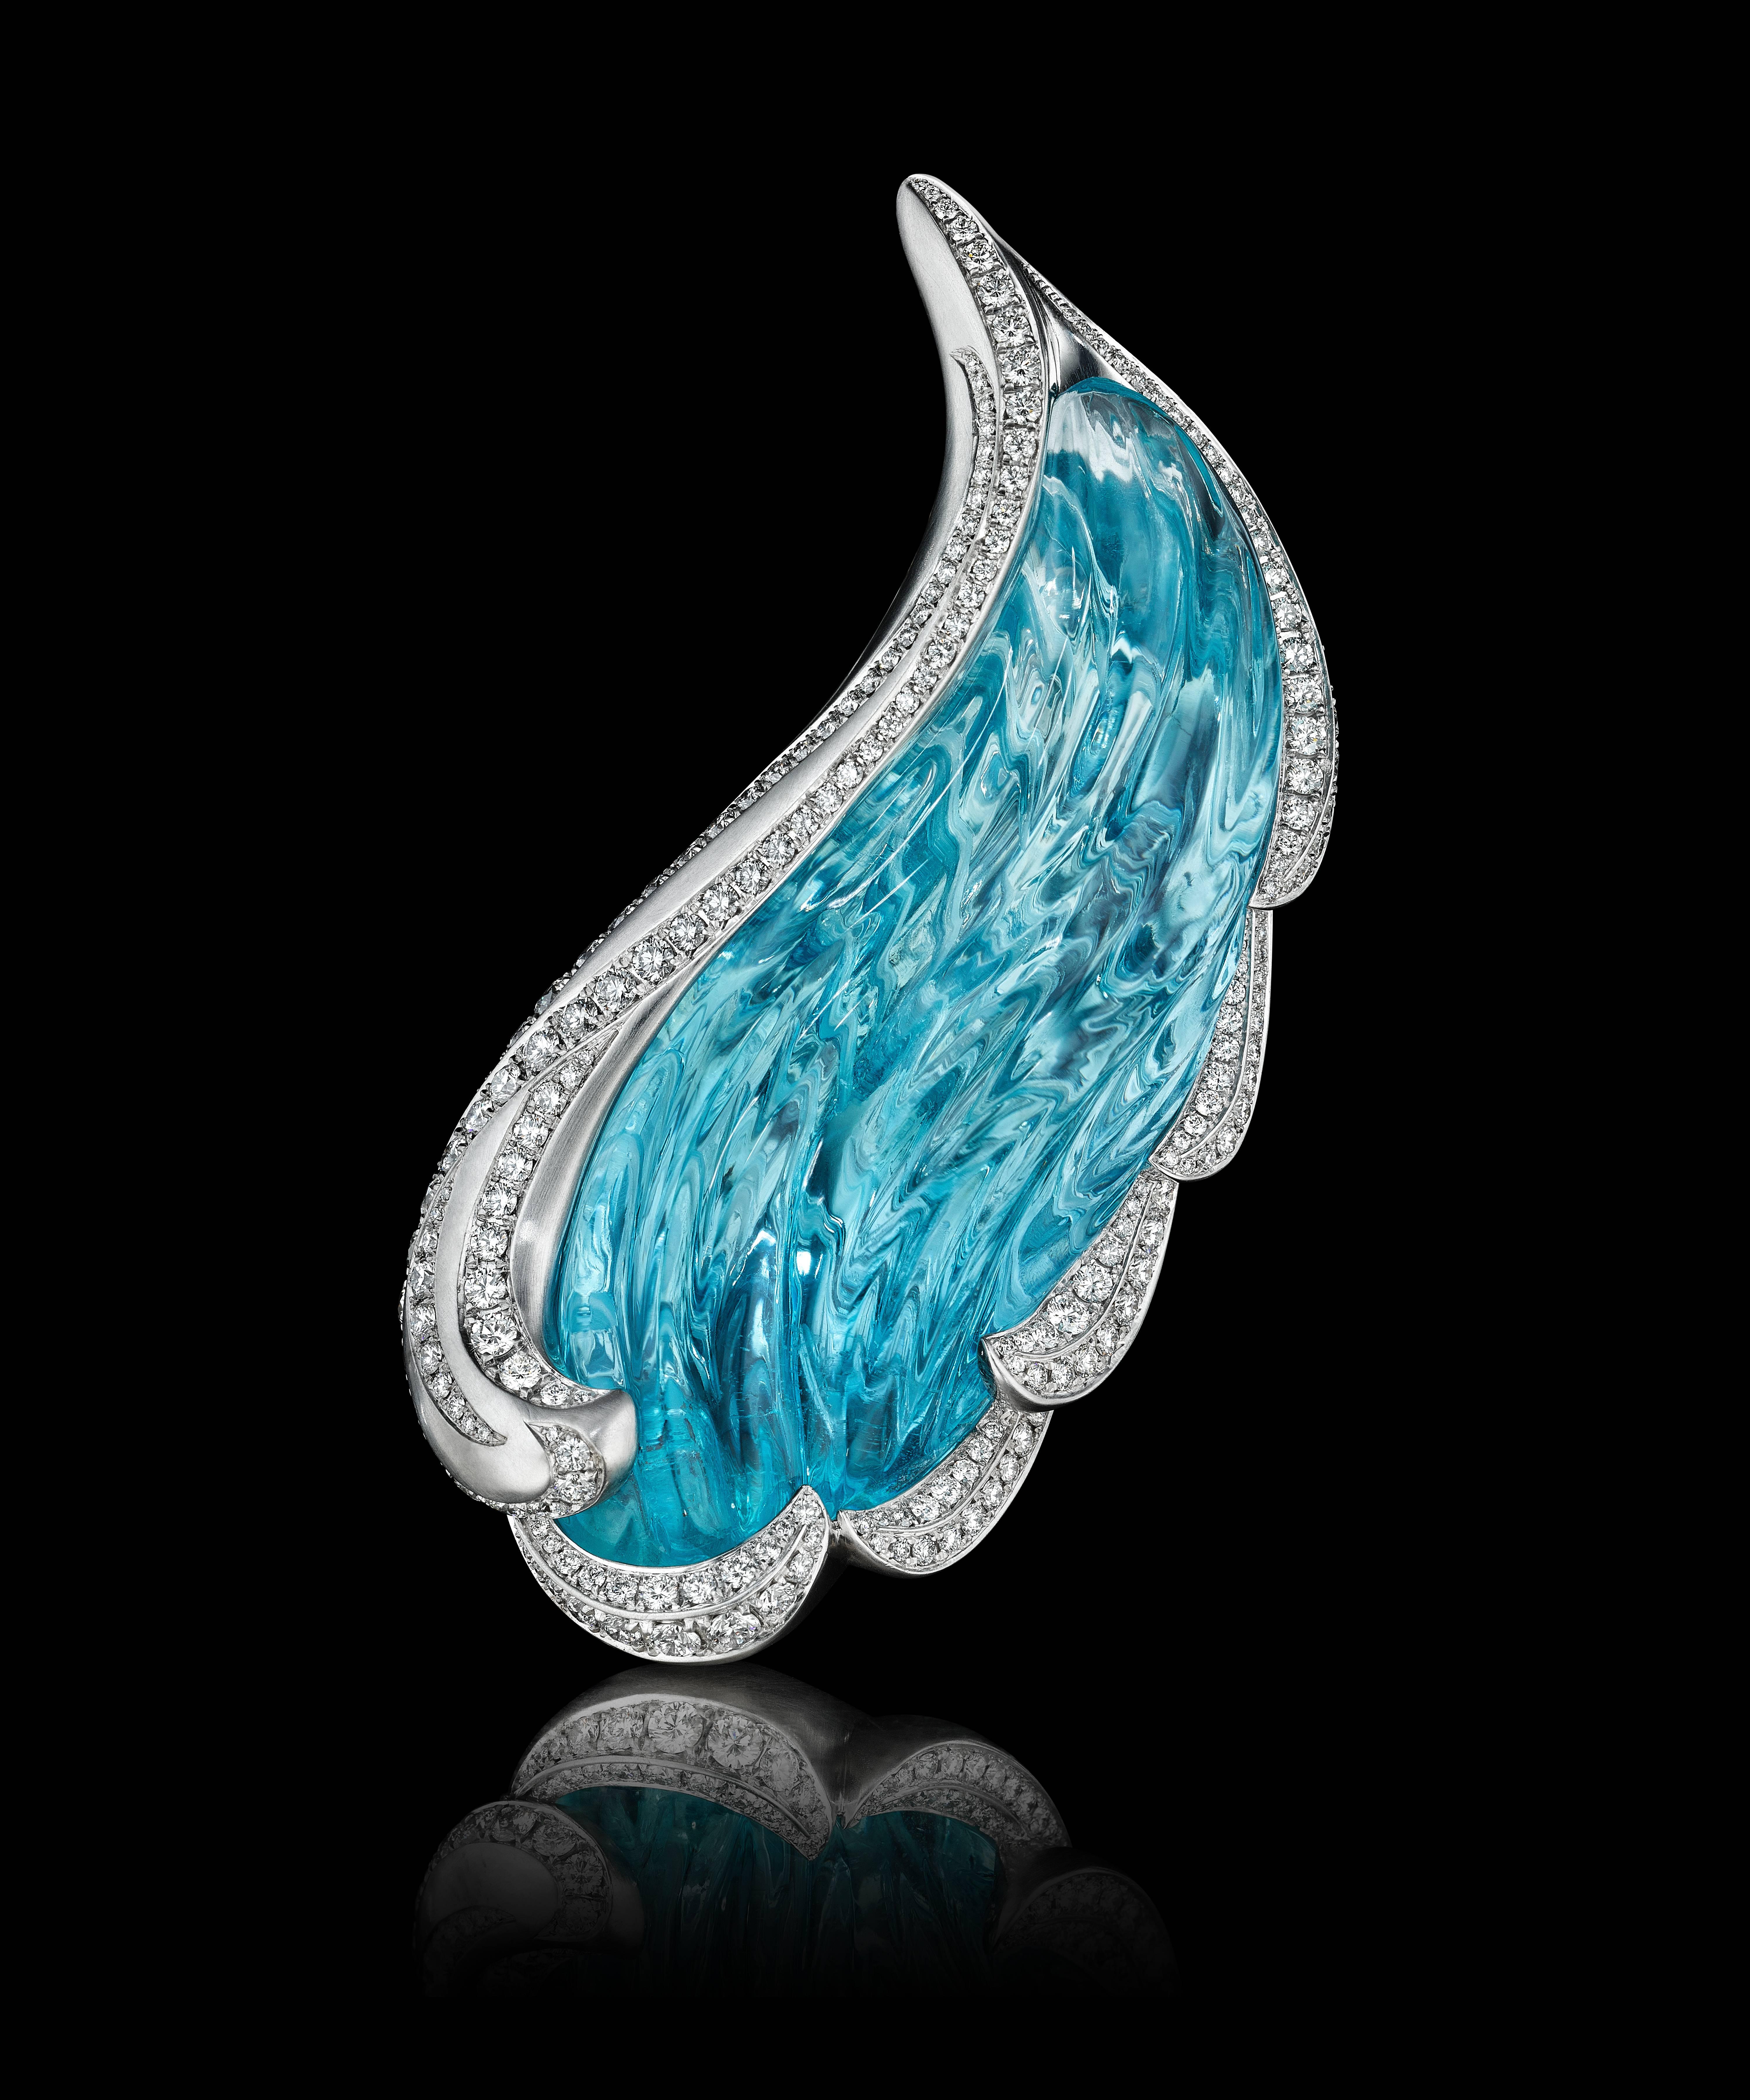 Stunning, one of a kind brooch featuring a hand-carved natural, unheated 91.64 ct aquamarine. The gem is carved masterfully on both sides to create an intricate play of light and color. Set in custom crafted 18K palladium white gold with flowing